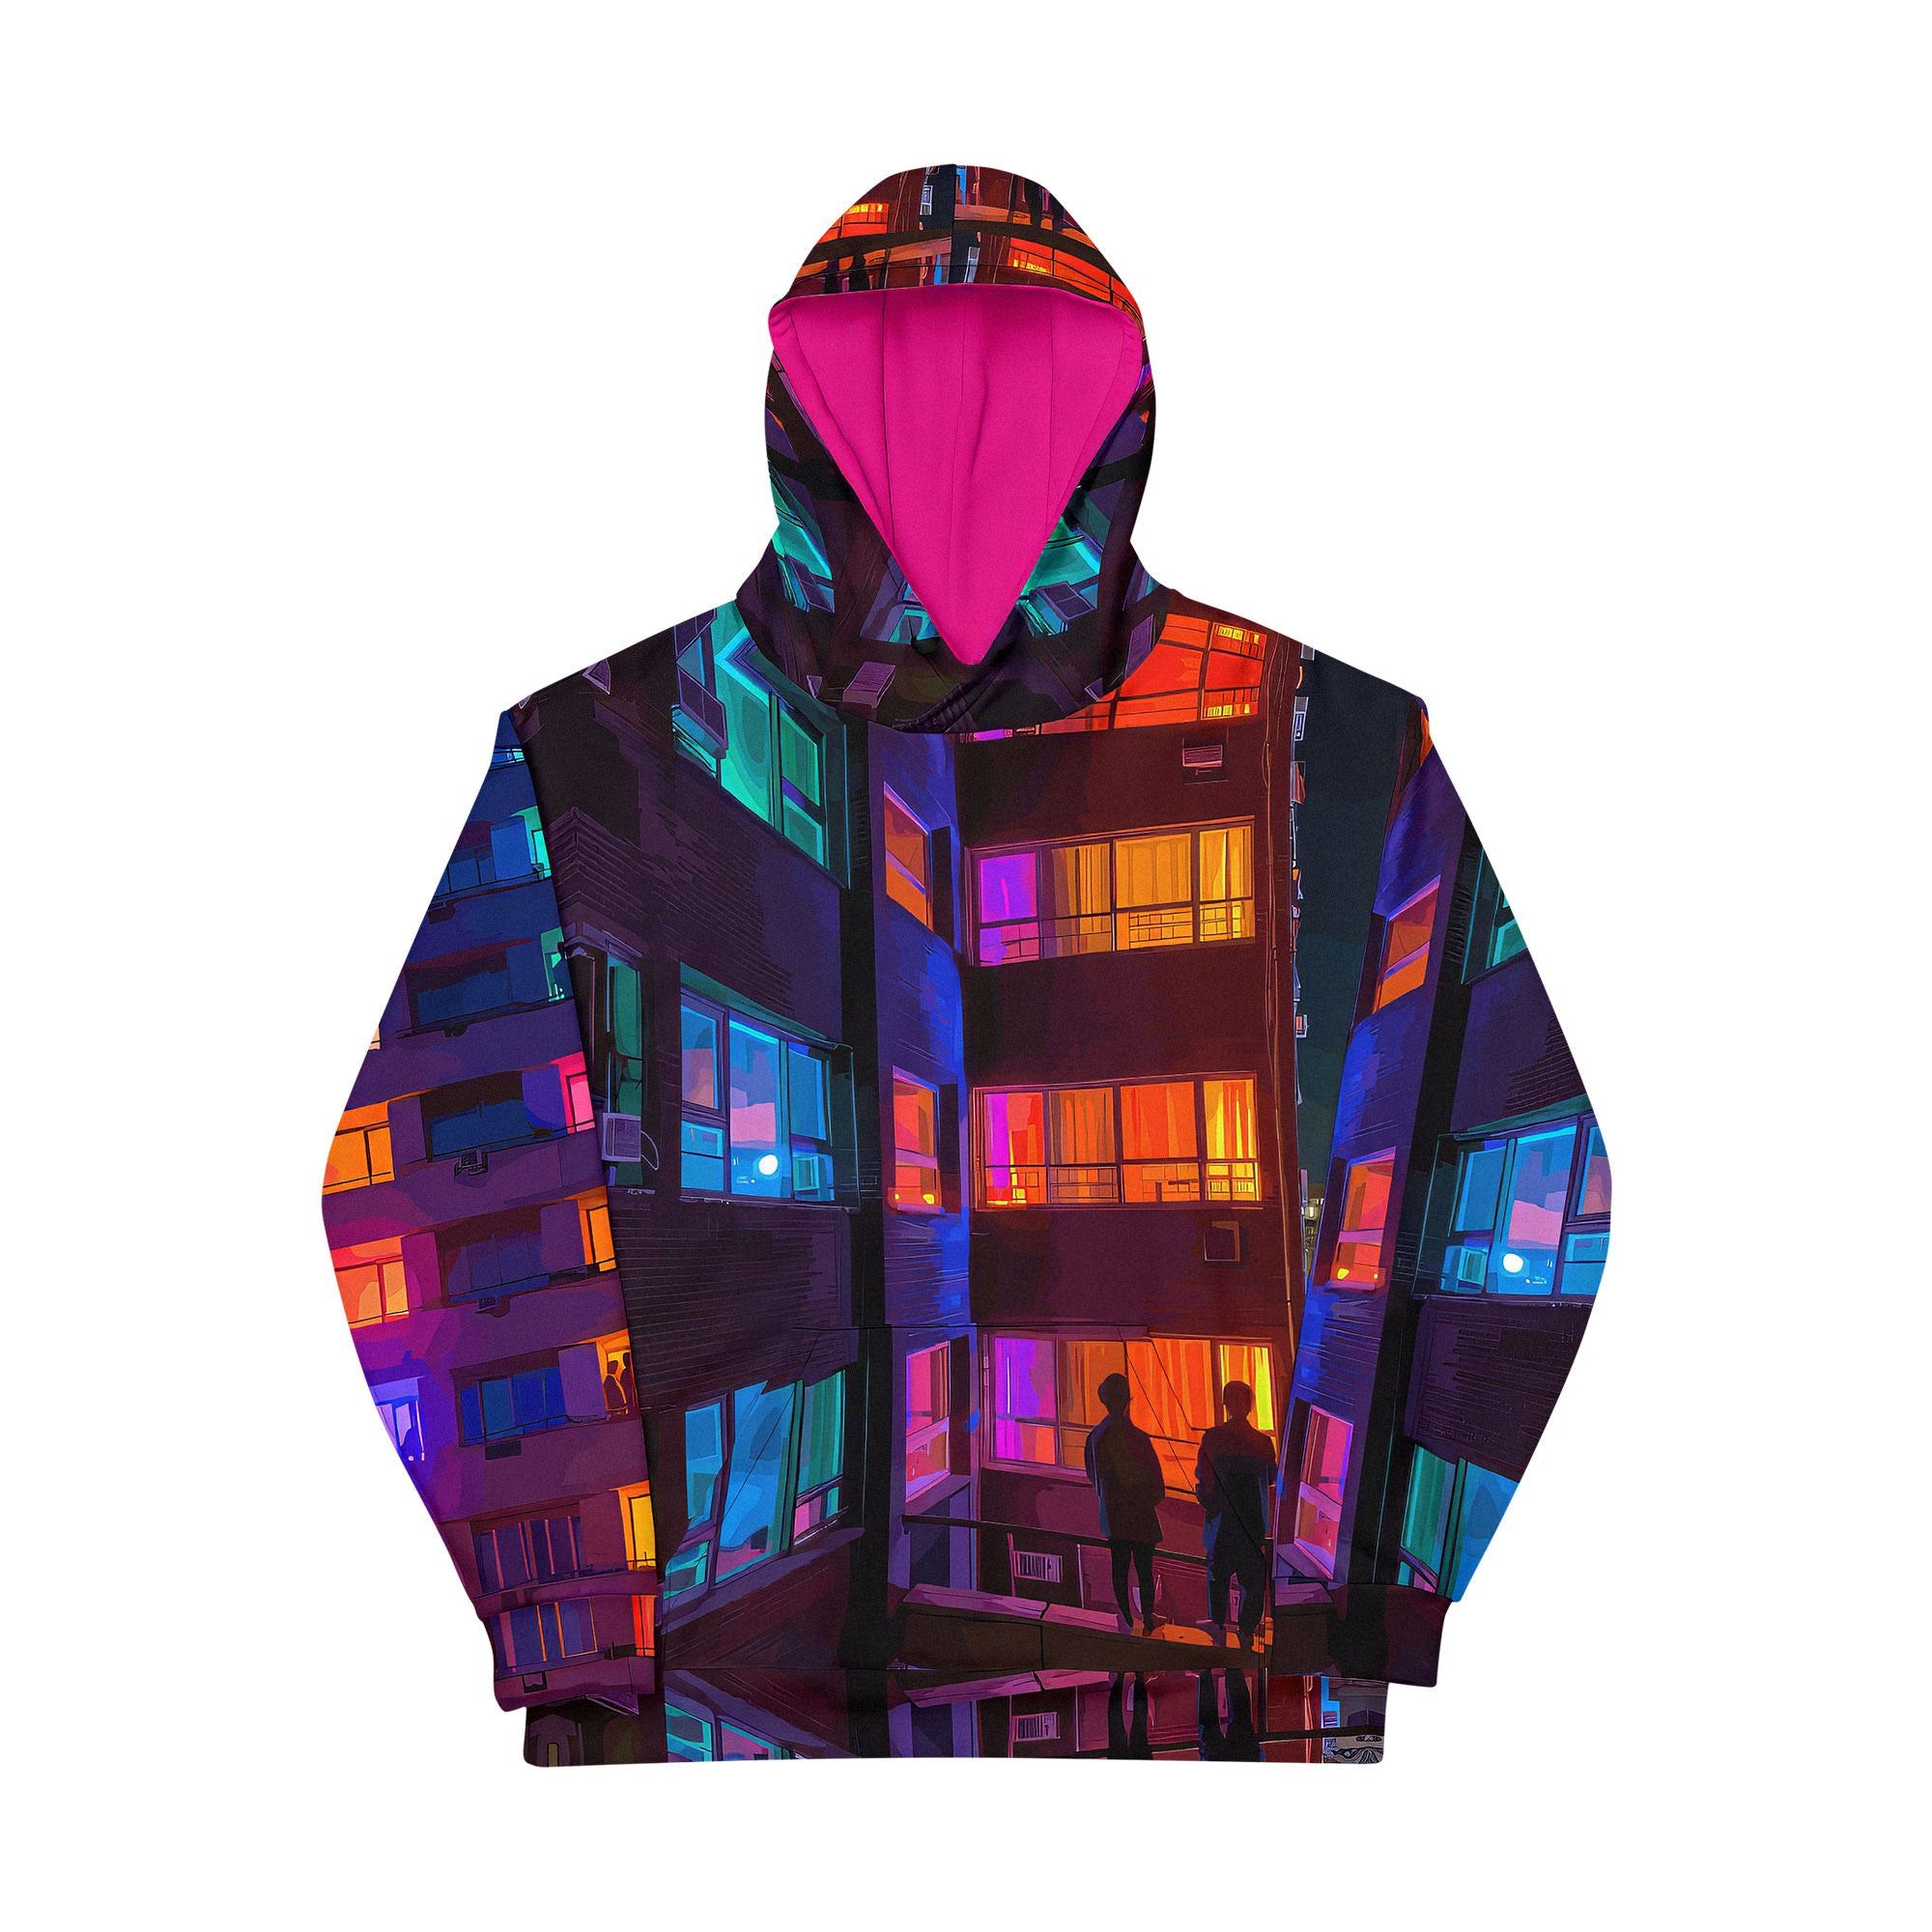 Unisex comfy relaxed fit hoodie has a soft outside with a vibrant print and an even softer brushed fleece inside. Precisely printed, cut & hand sewn.